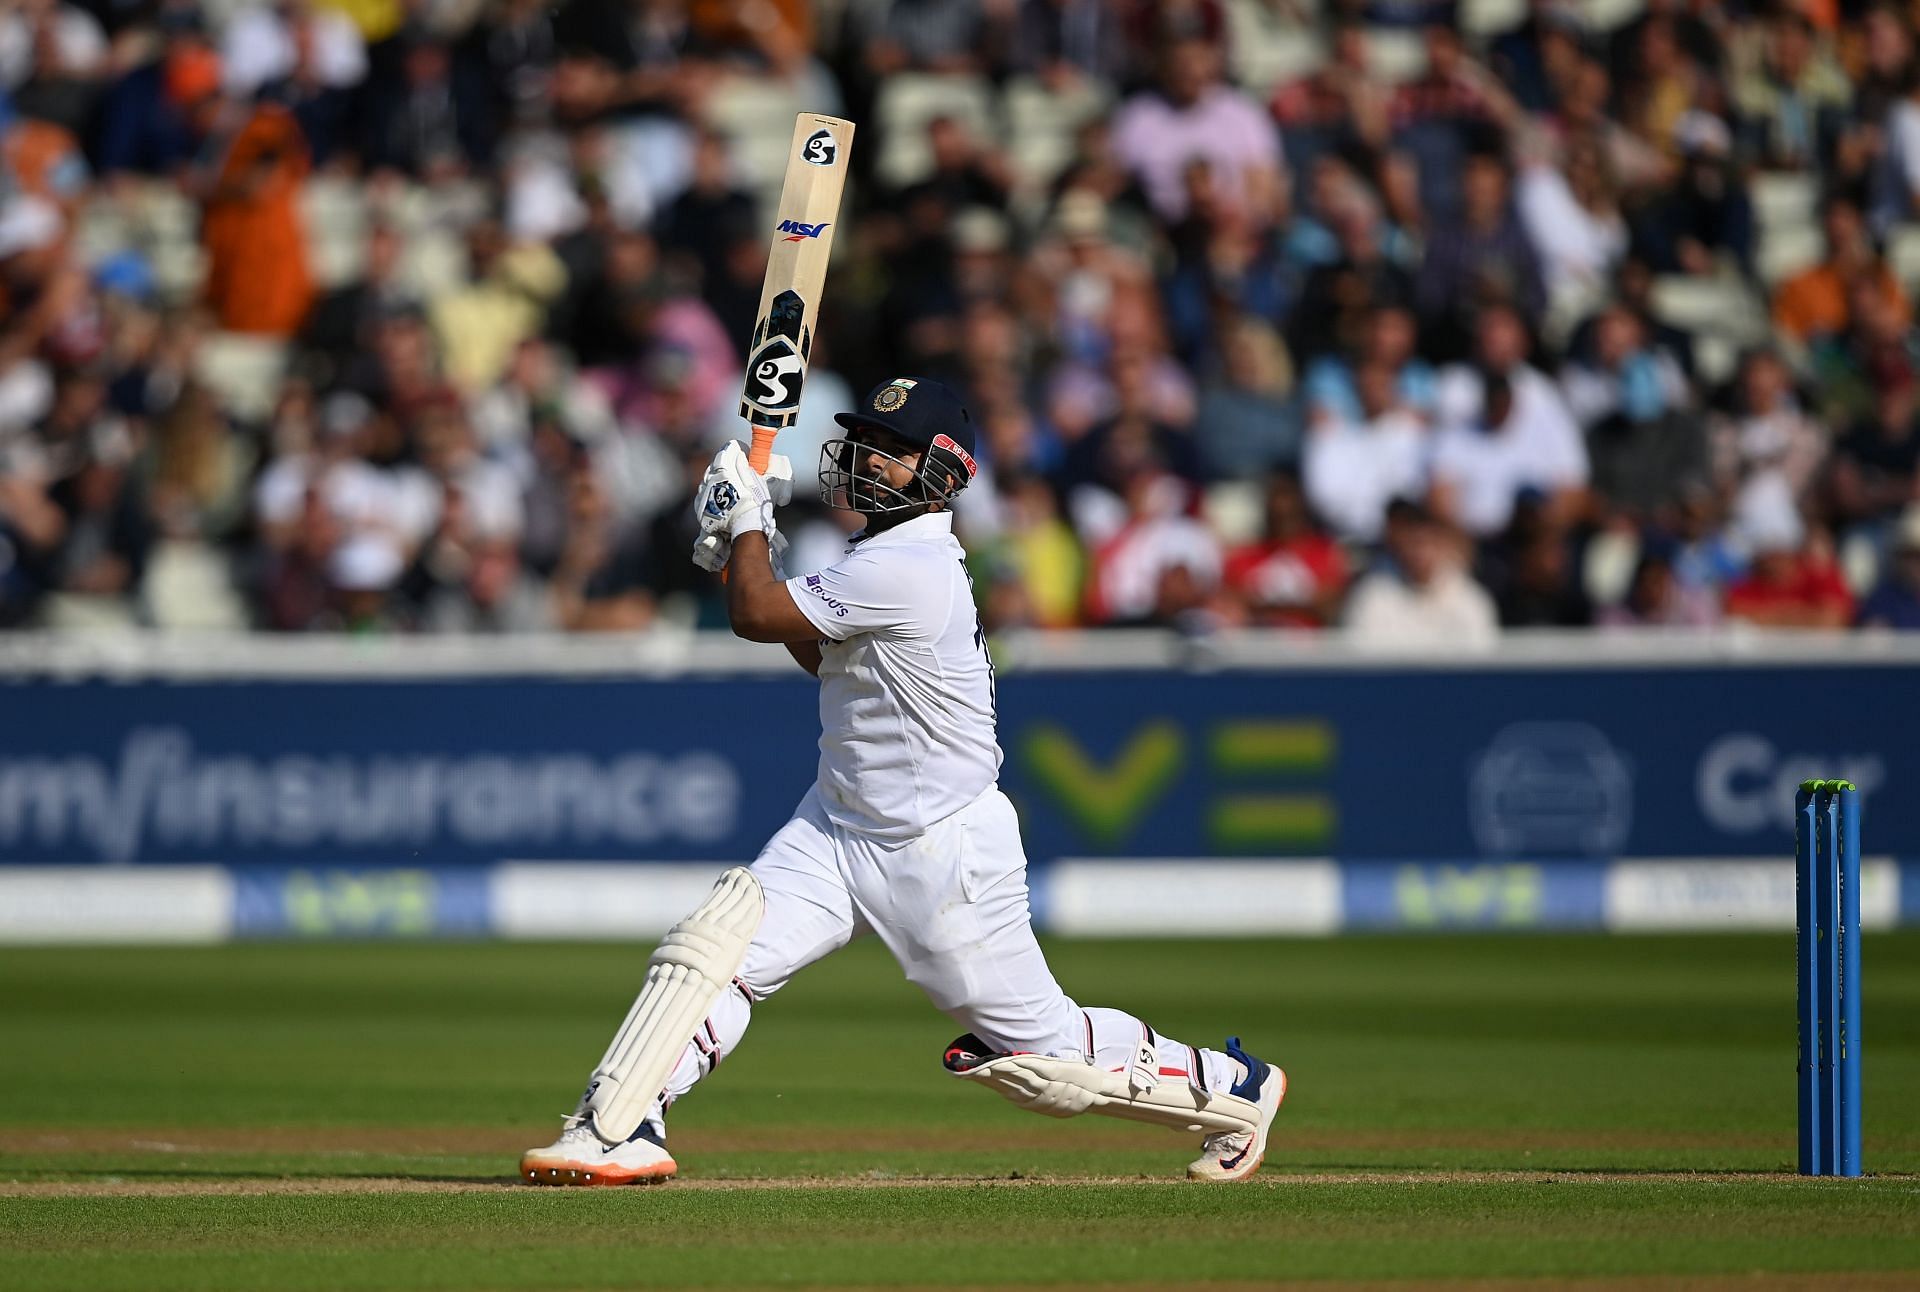 Rishabh Pant bats during Day 1 of the Fifth Test at Edgbaston. Pic: Getty Images